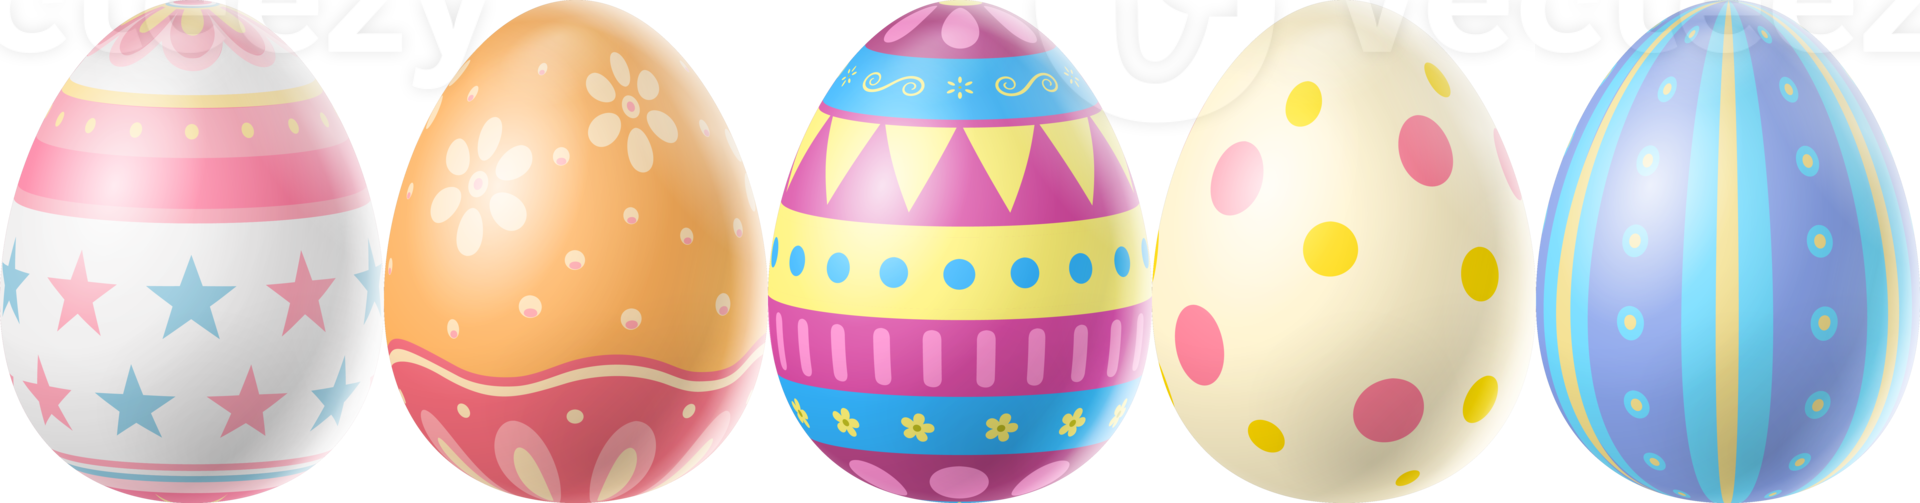 frohes ostern buntes ei png